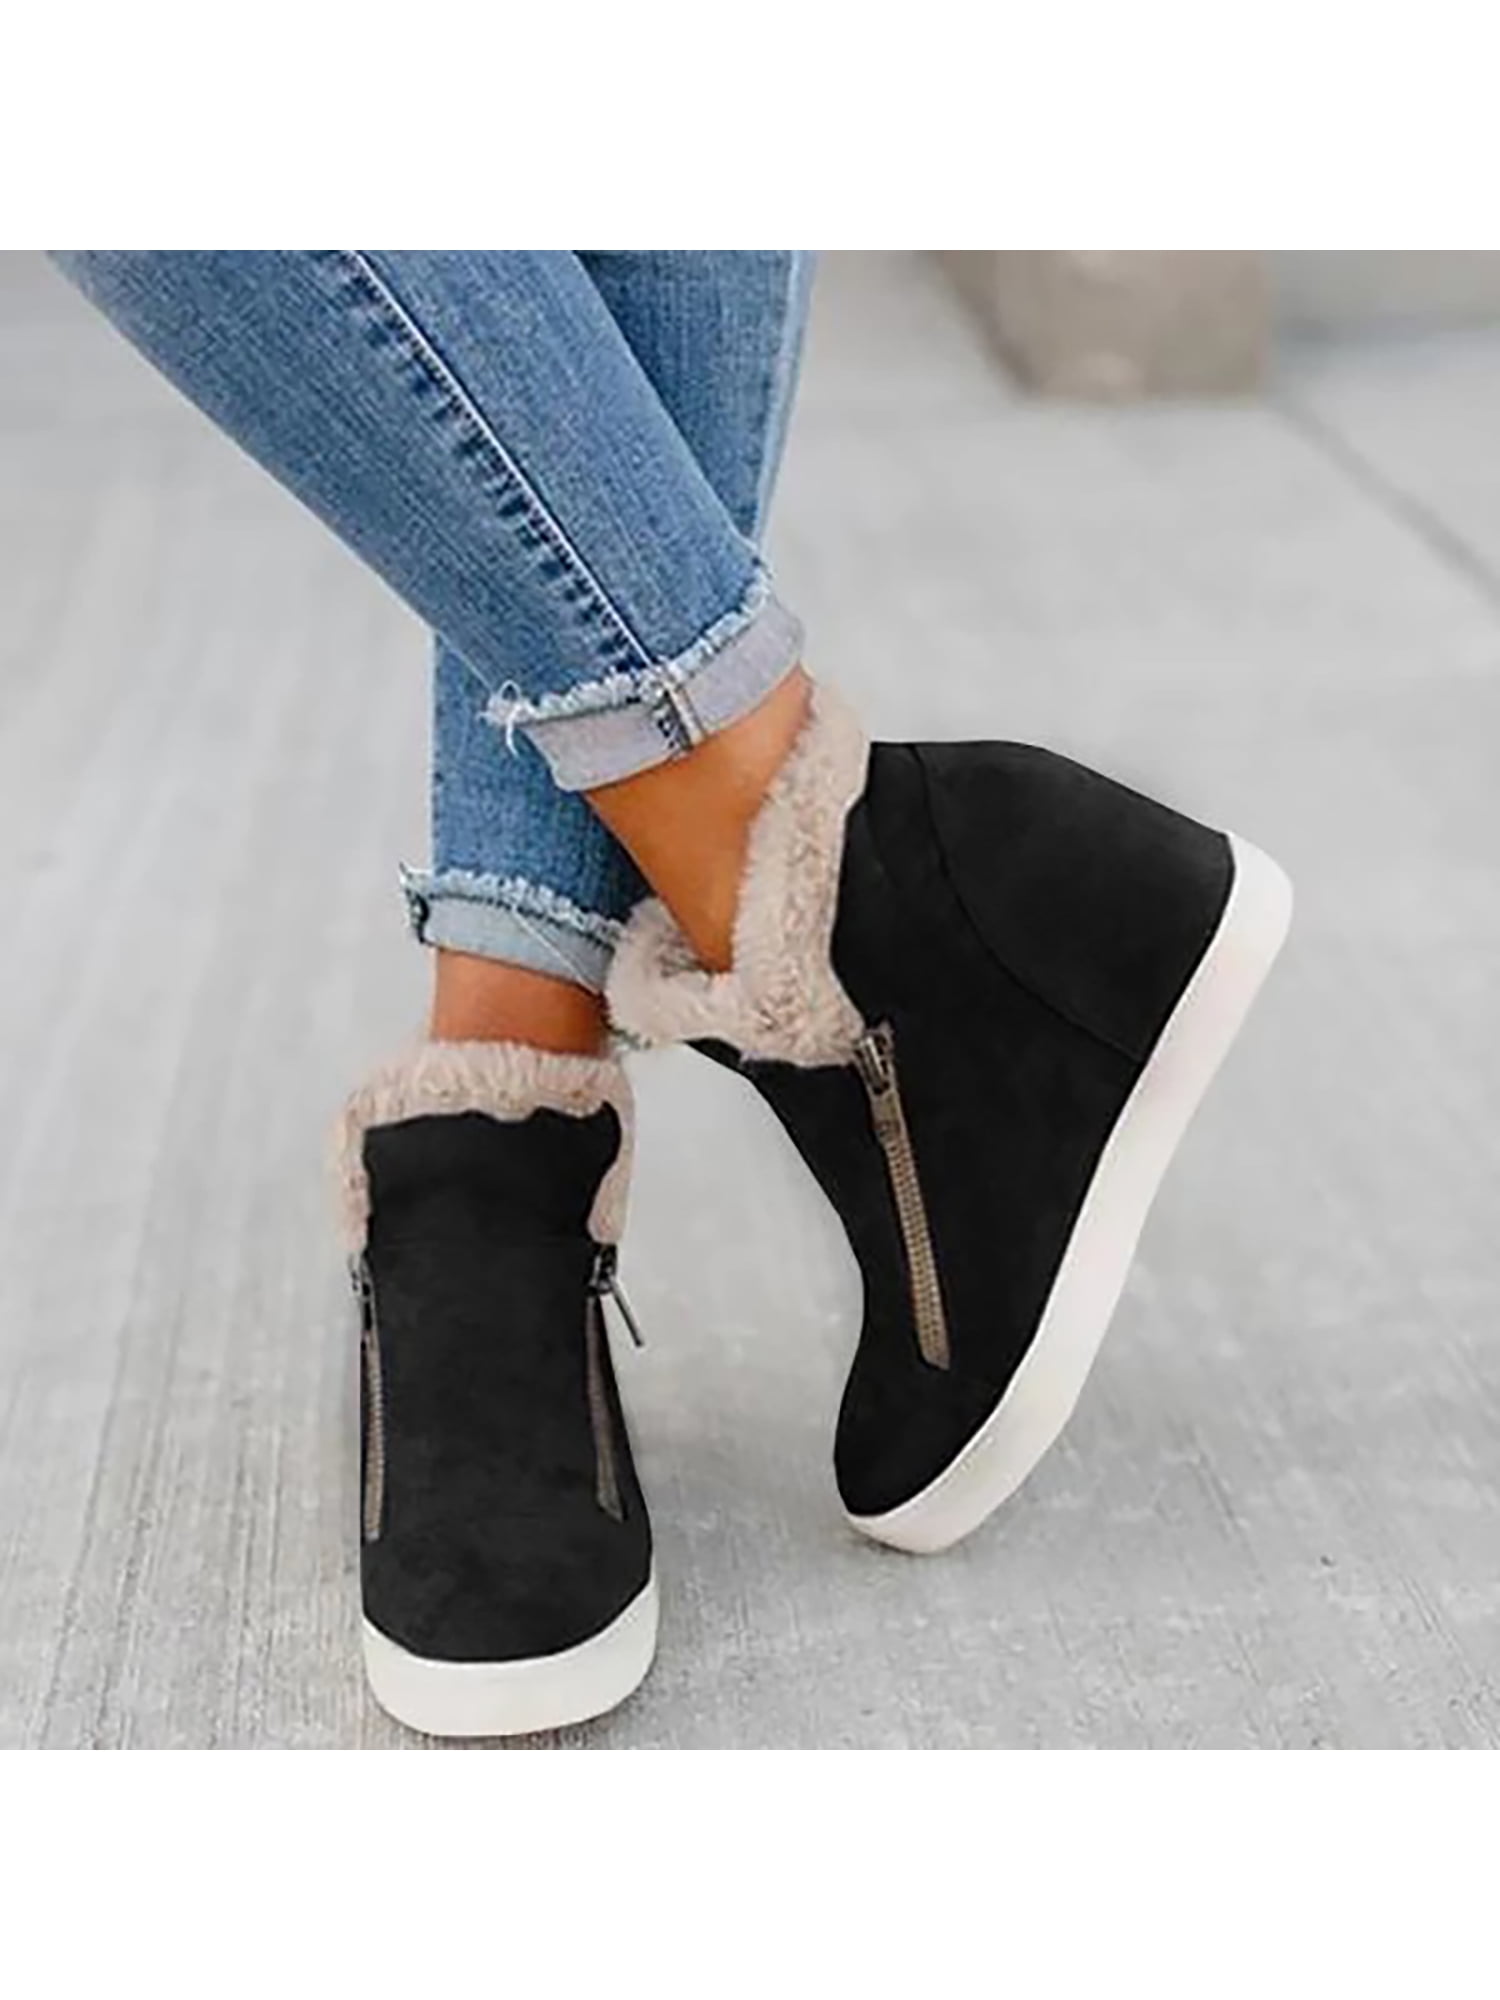 Womens Fashion Buckle Ankle Boots Fur Flat Boot Slip On Suede Shoes Size  5-9 